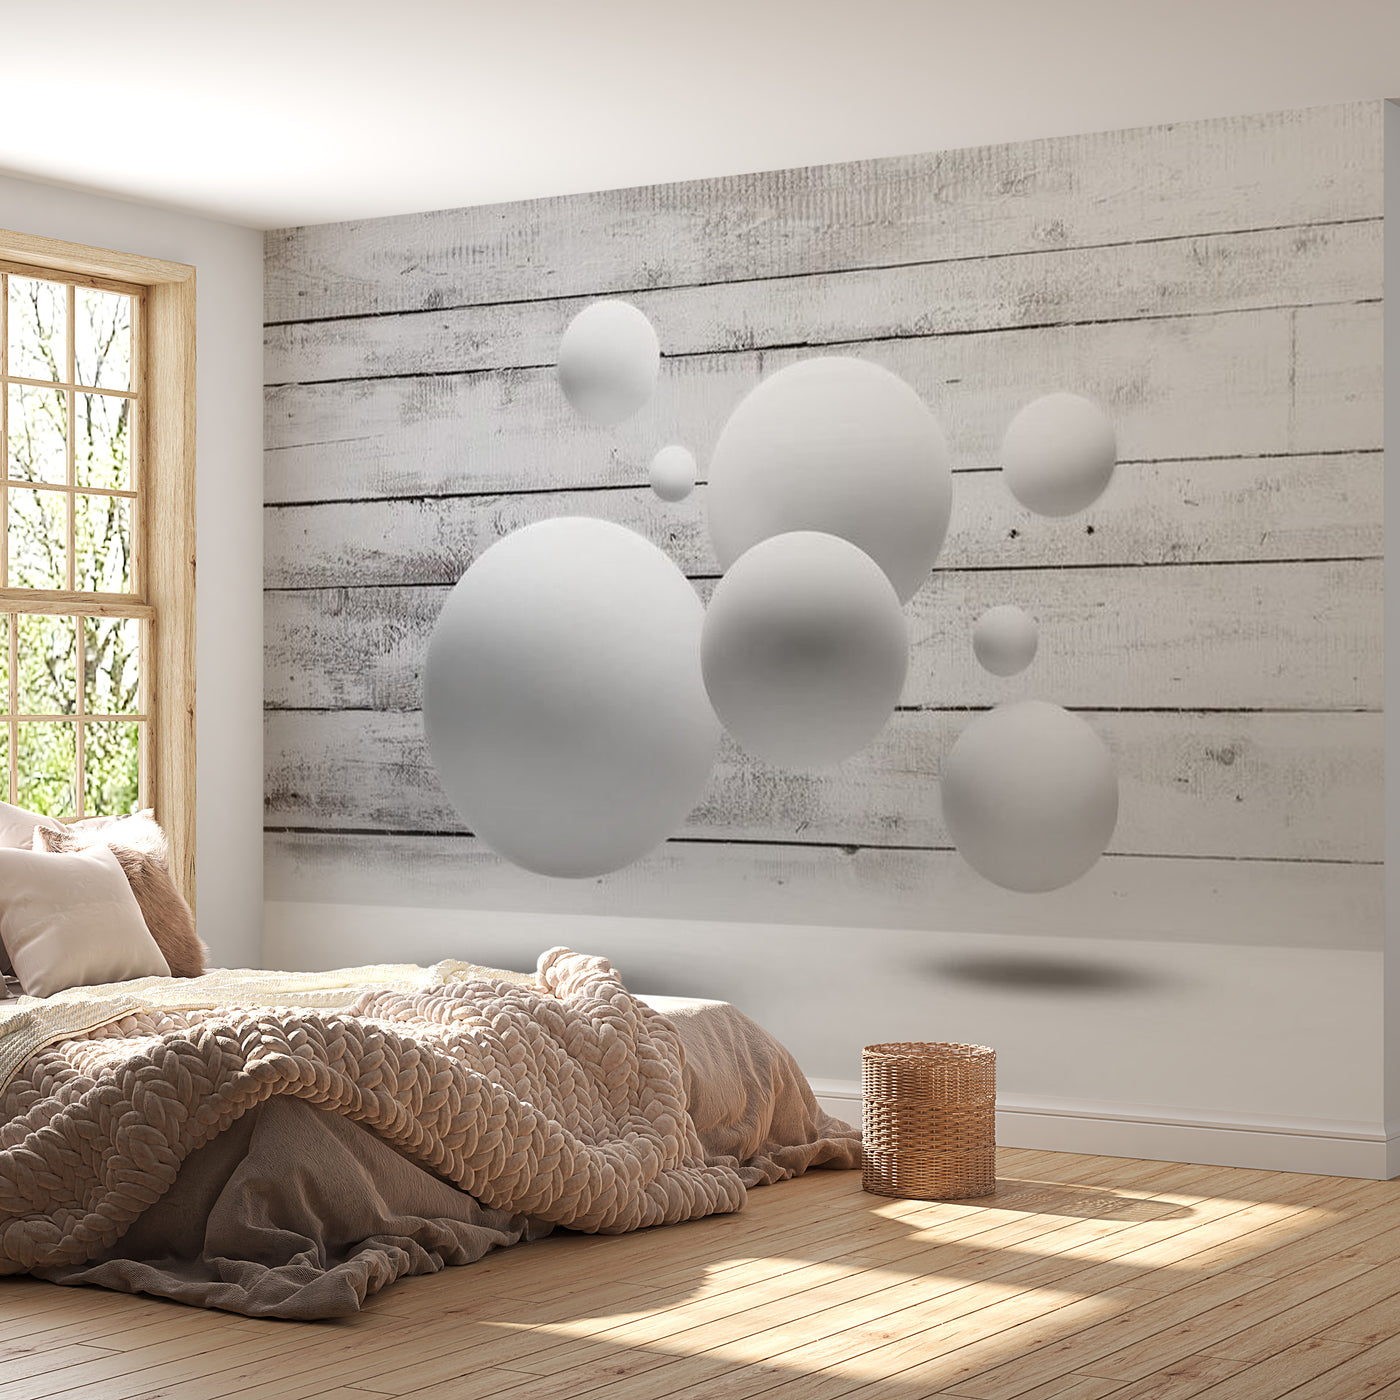 Peel & Stick 3D Illusion Wall Mural - Balls - Removable Wall Decals